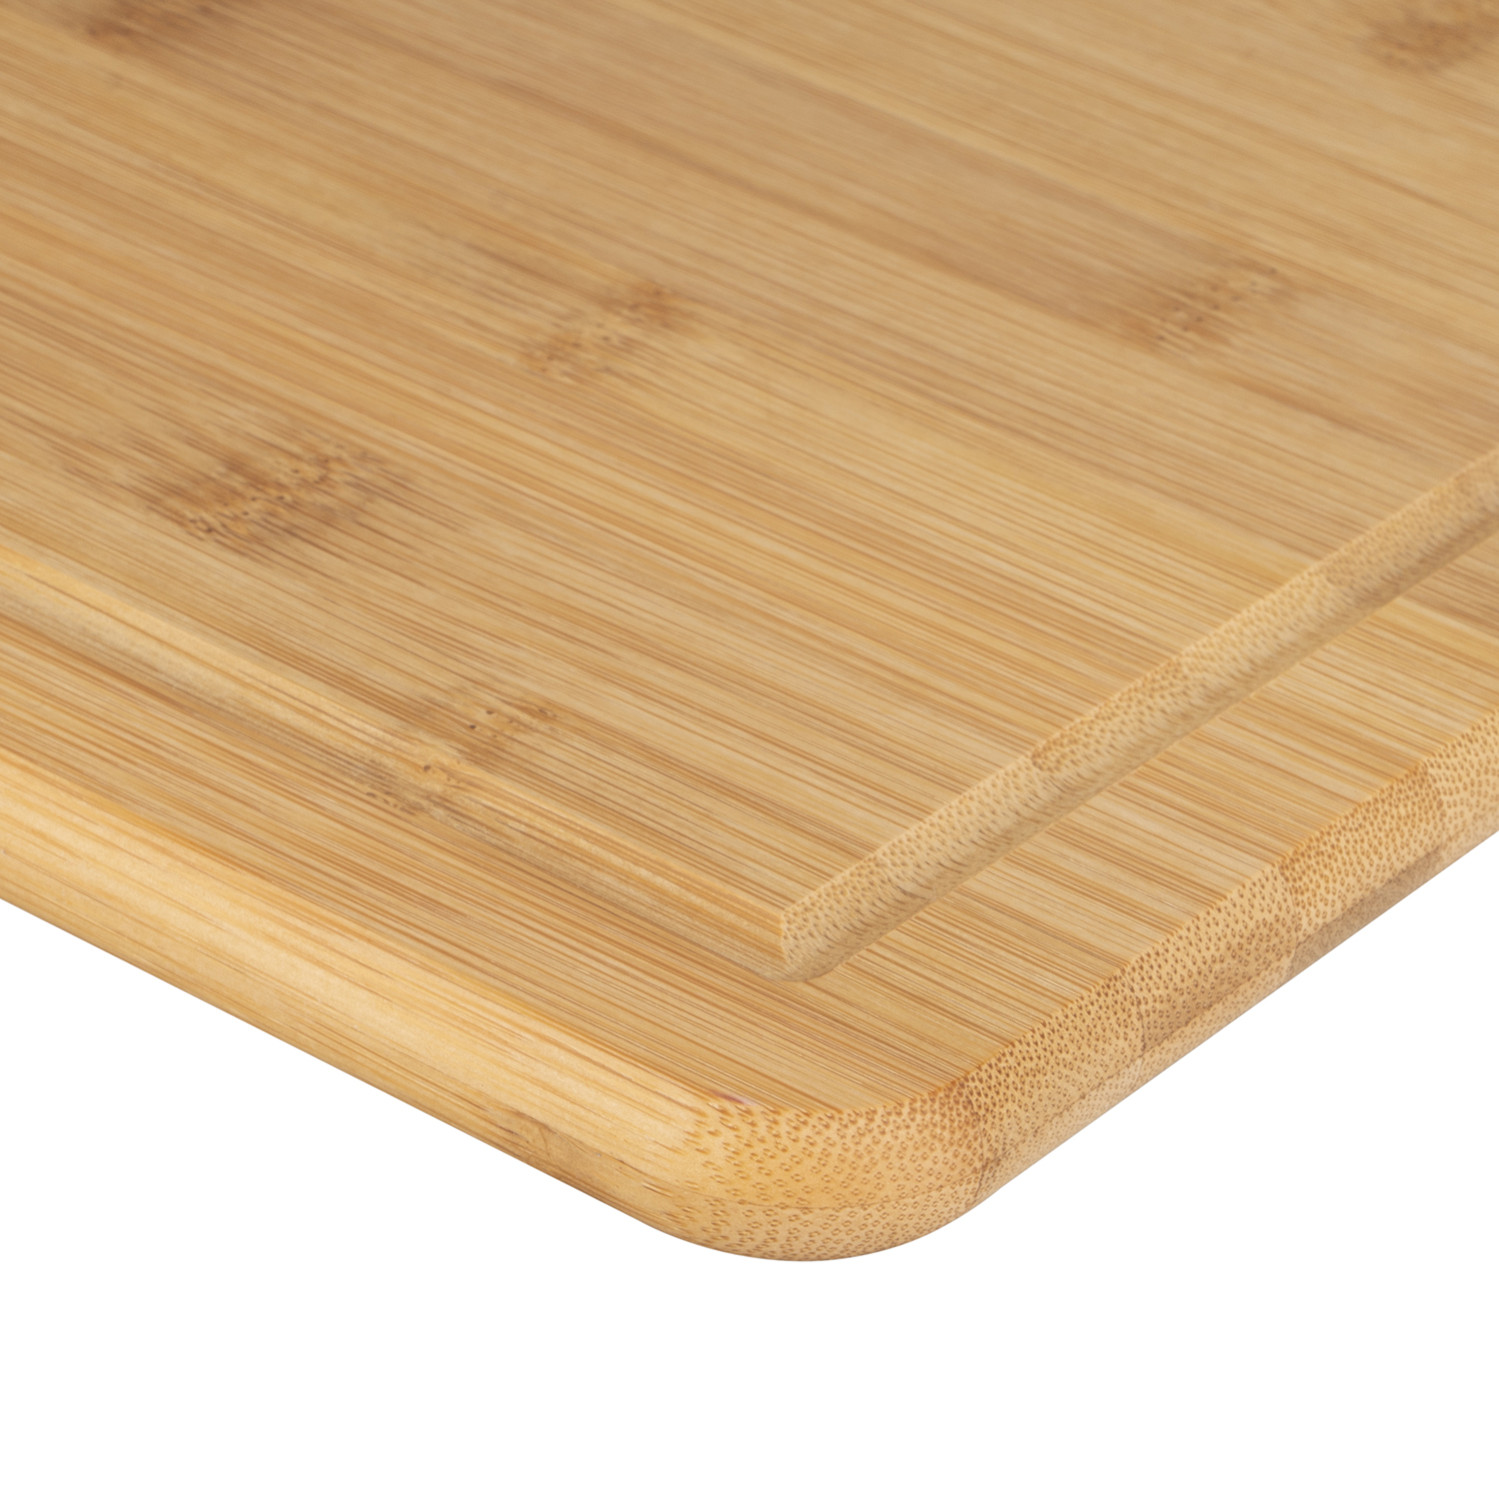 Large Bamboo Chopping Board with Wire Handle Image 2